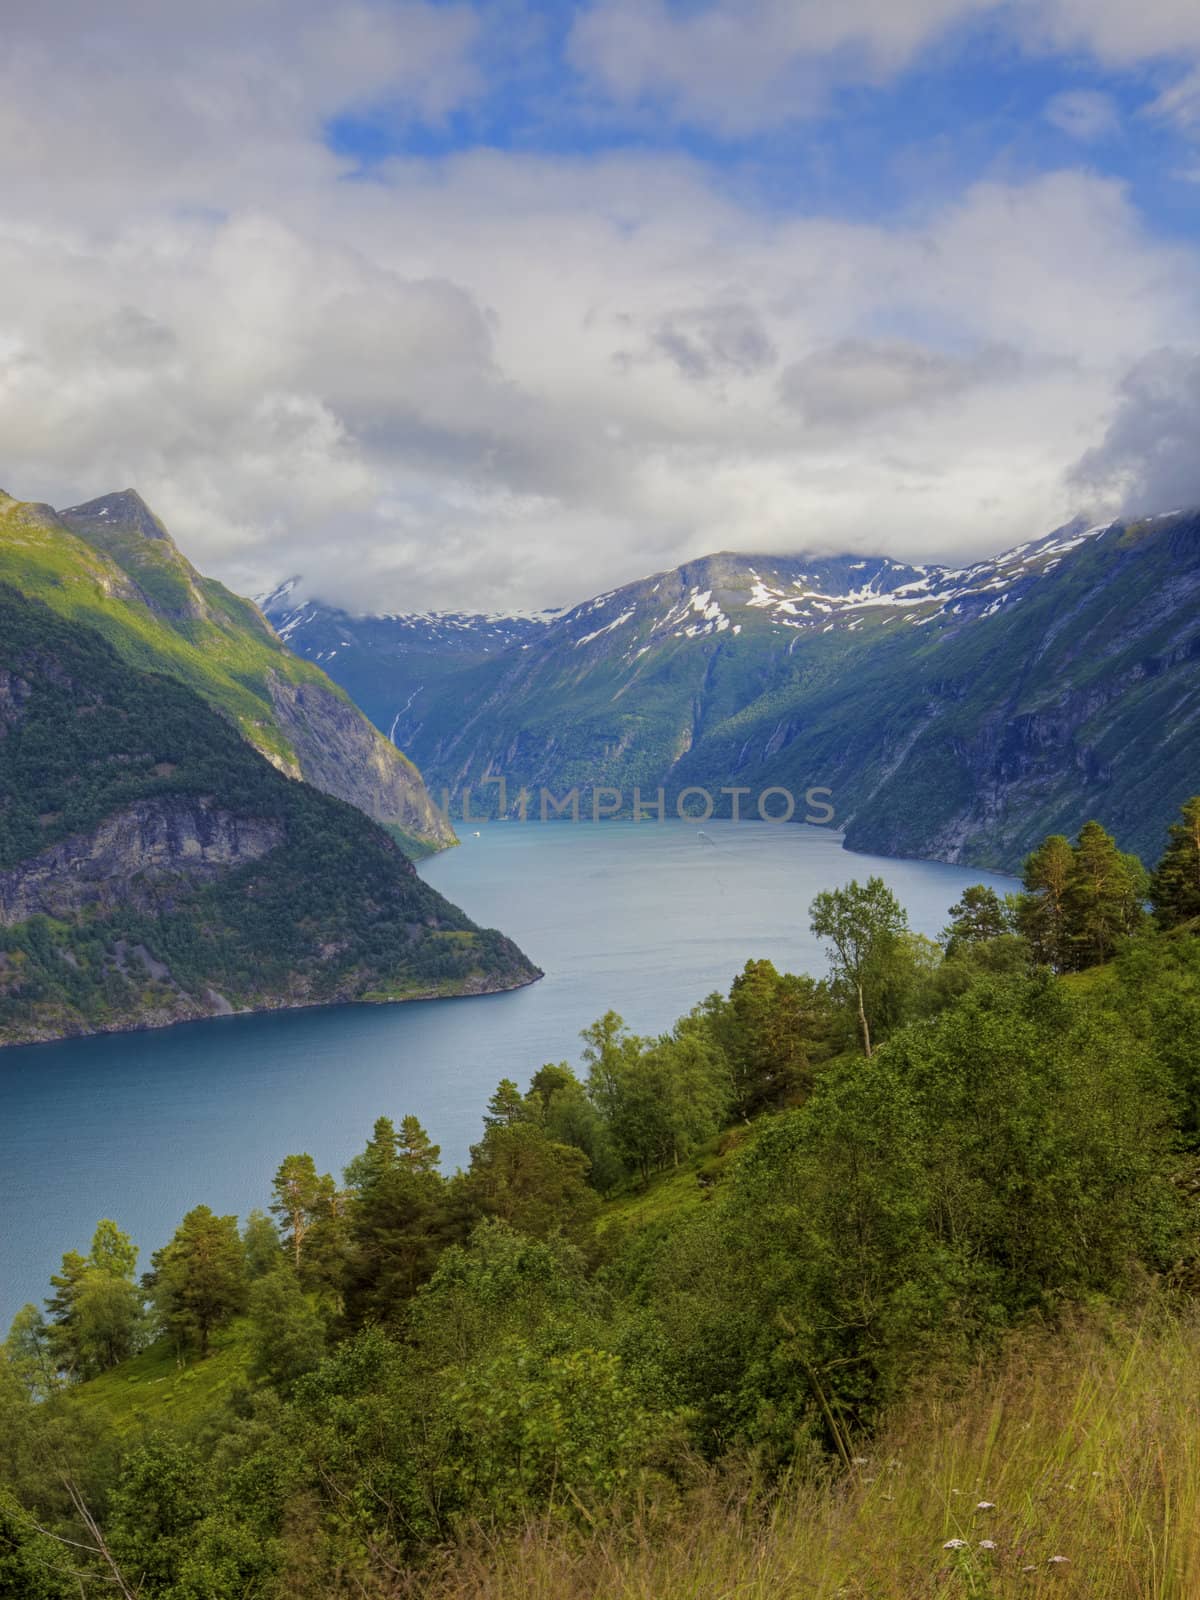 The Geiranger fjord in Norway, surrounded by high mountains